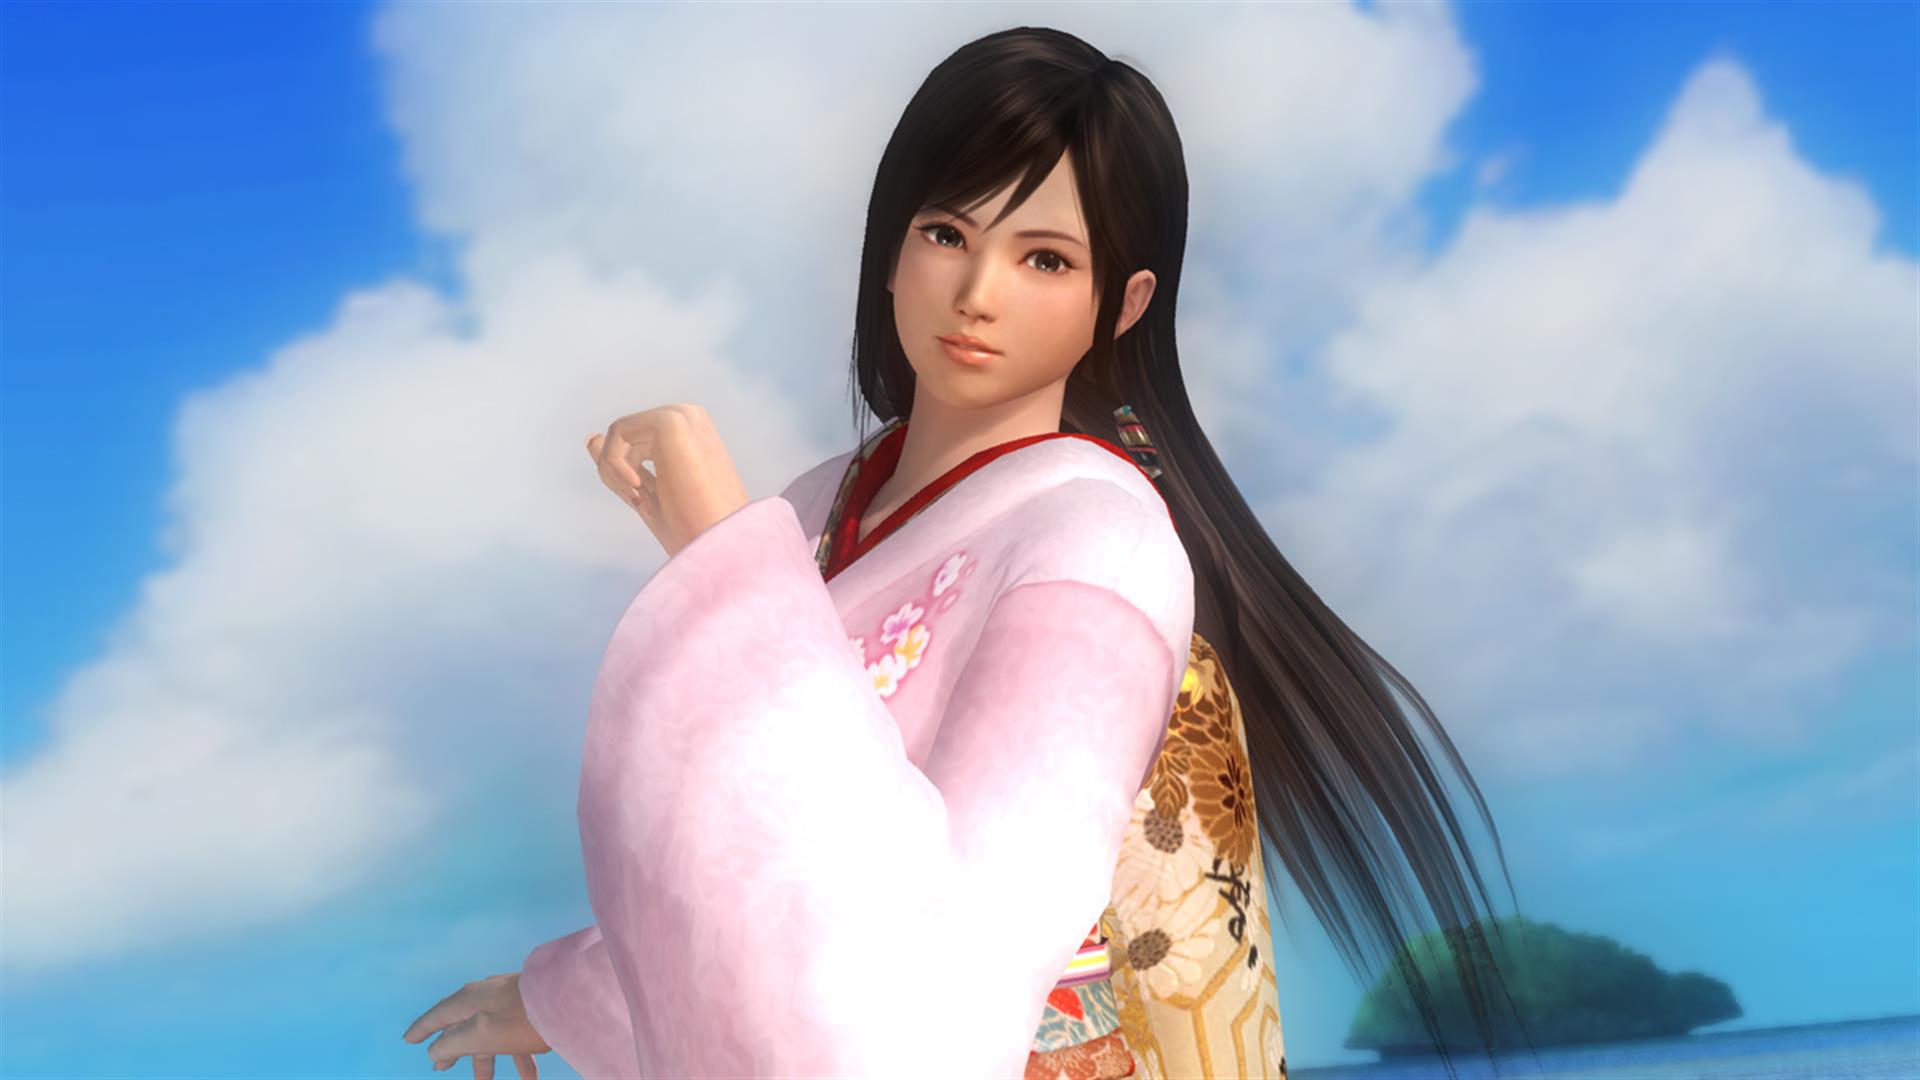 download free dead or alive 5 last round core fighters